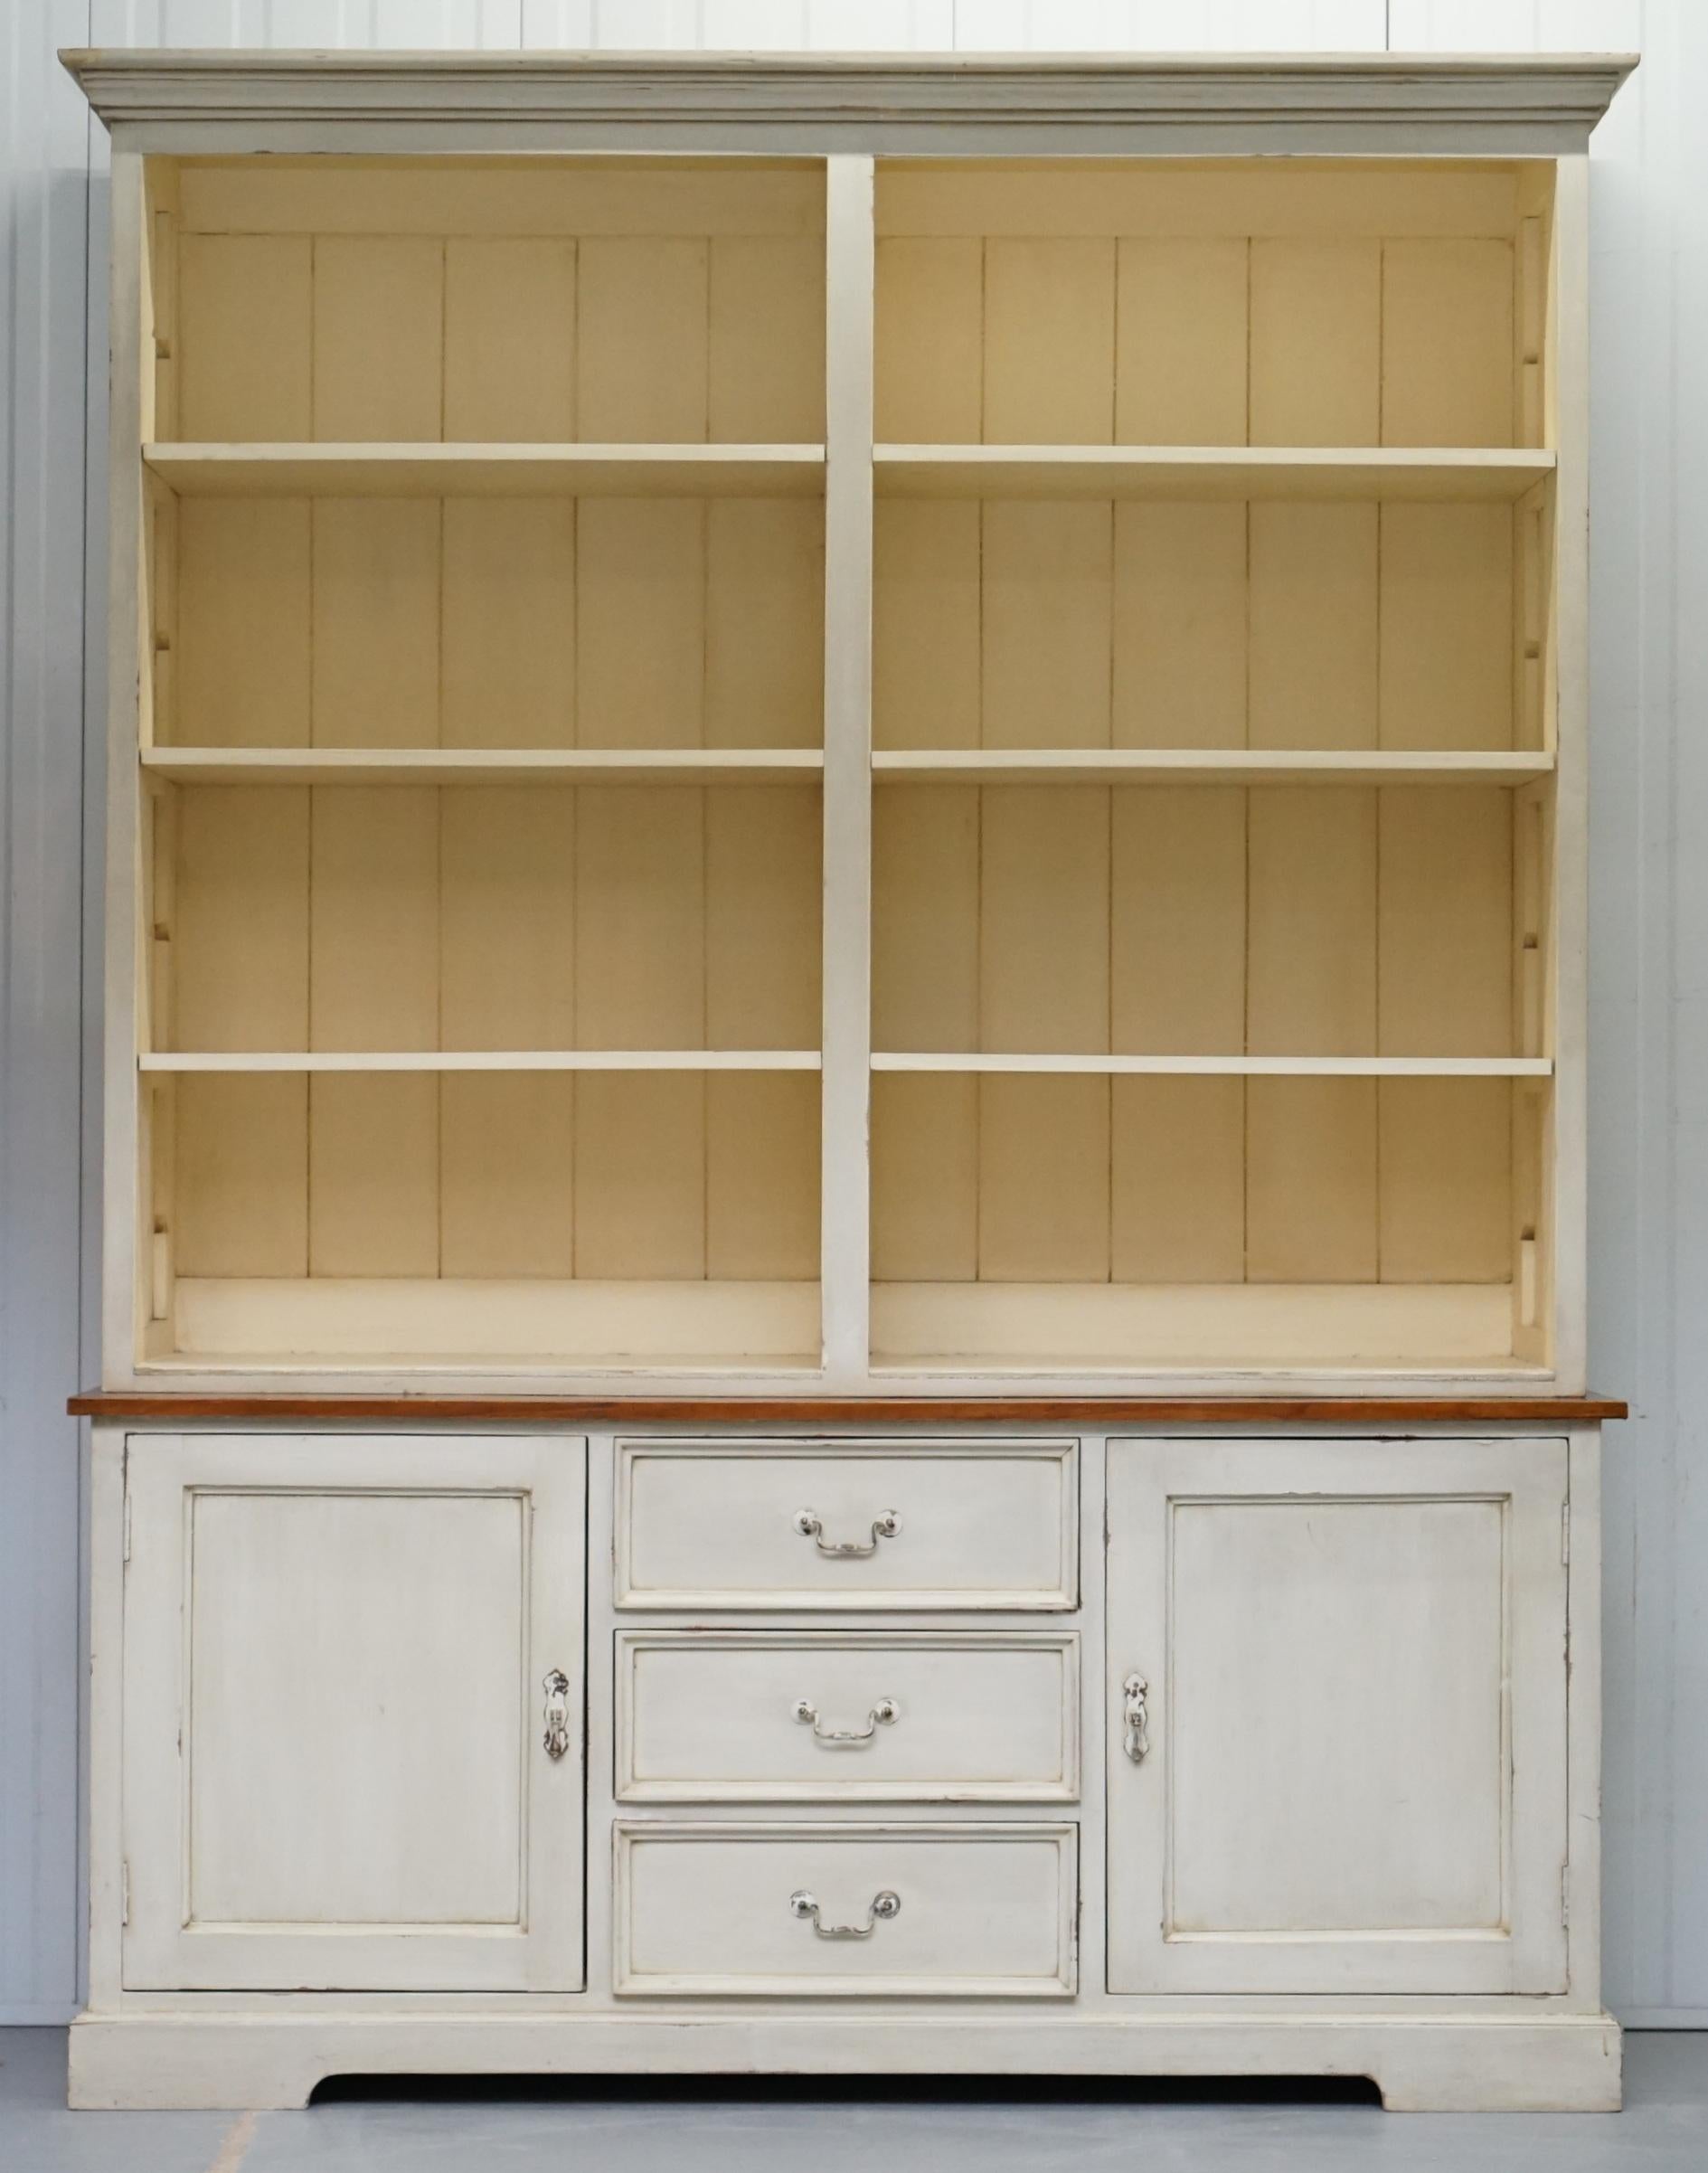 We are delighted to offer for sale this stunning Shaker-inspired kitchen haberdashery cupboard bookcase cabinet.

A very good looking and well made vintage piece of furniture, it's around 40-50 years old, made from solid oak, the shelves are all